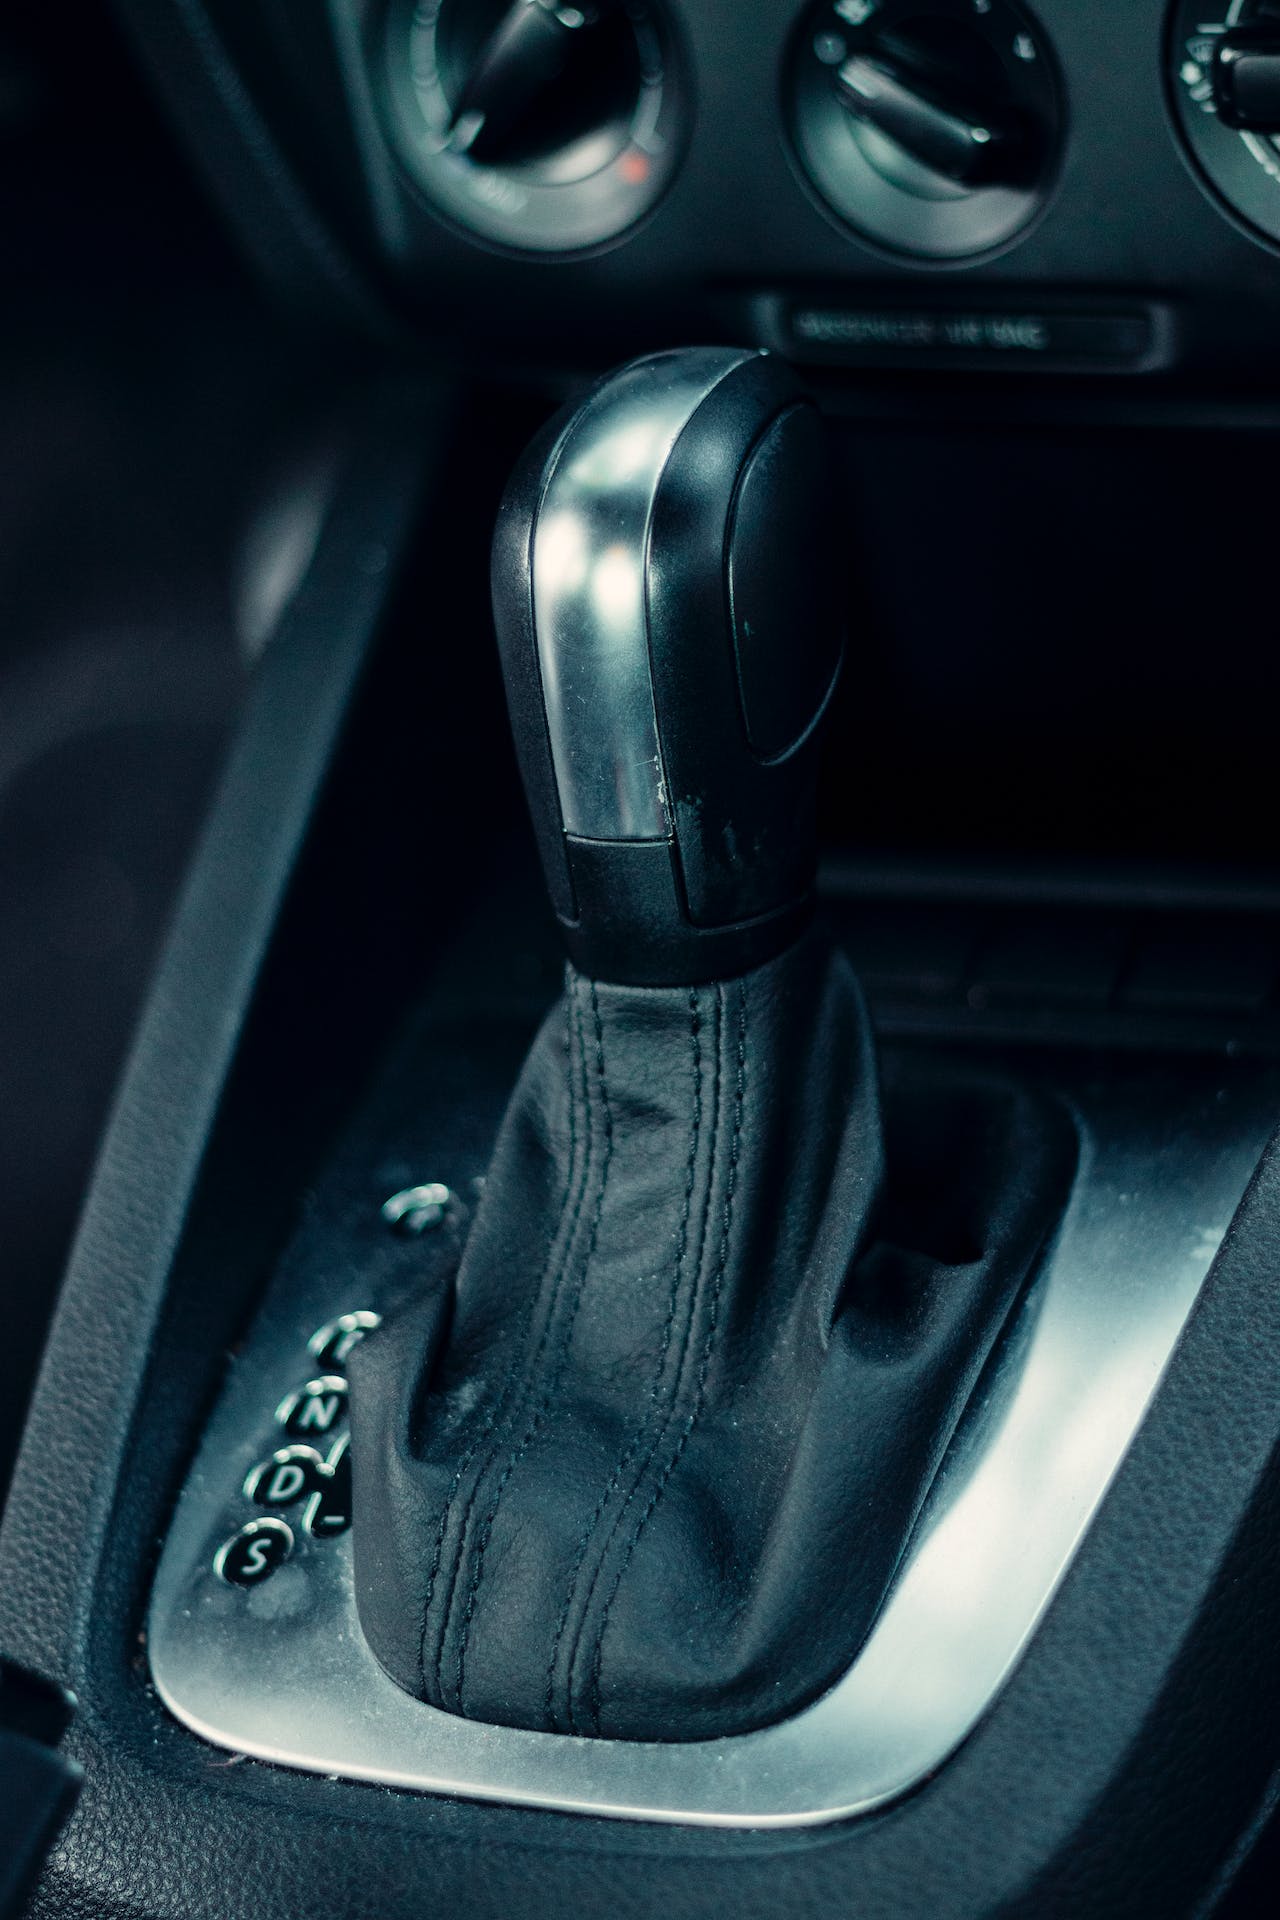 Manual Transmission Goes Into Gear but Won’t Move: REASONS